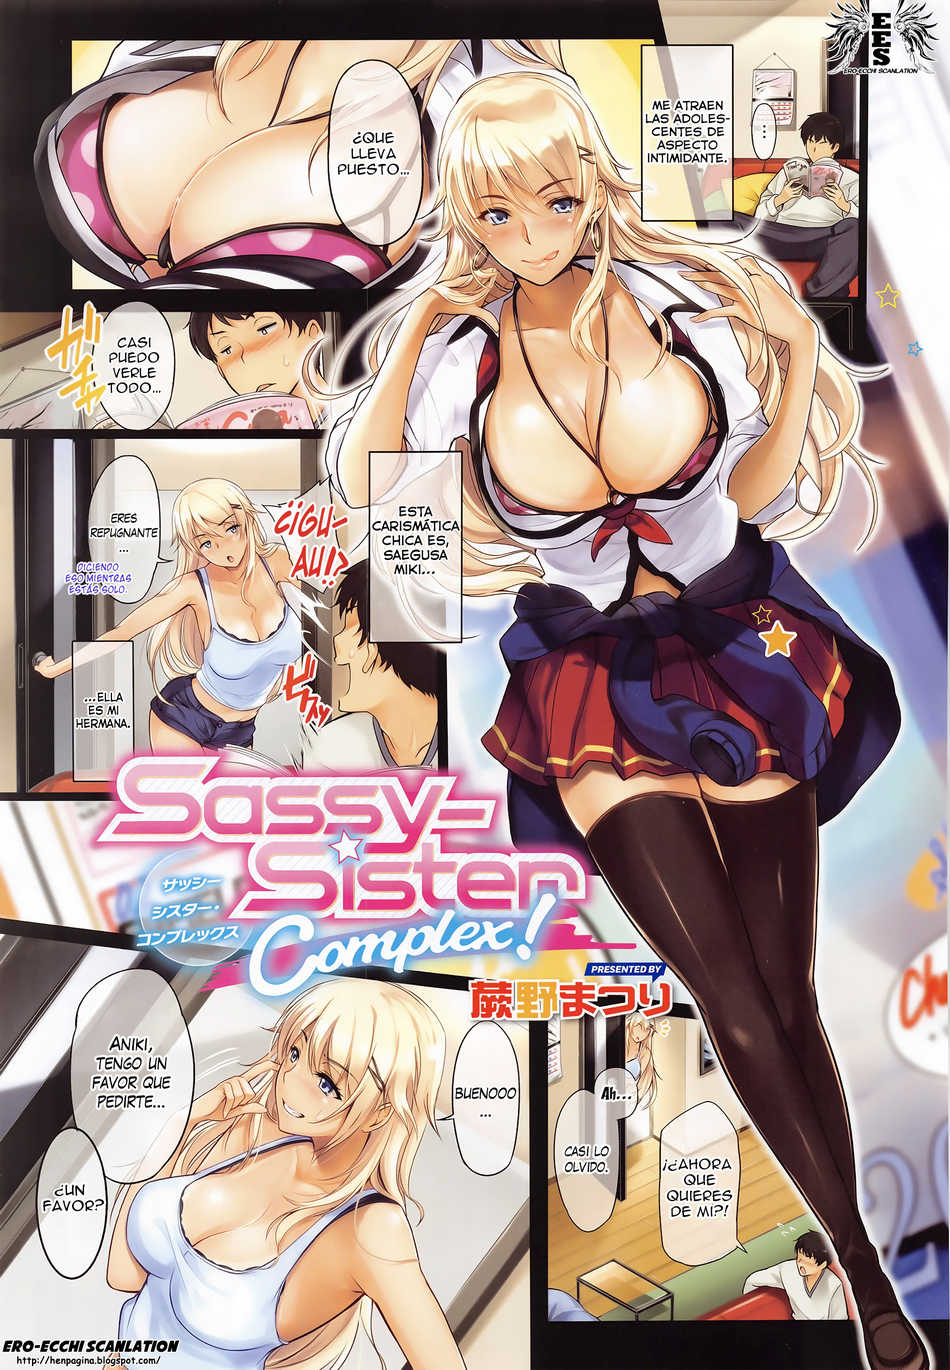 Sassy-Sister Complex! - Page #1